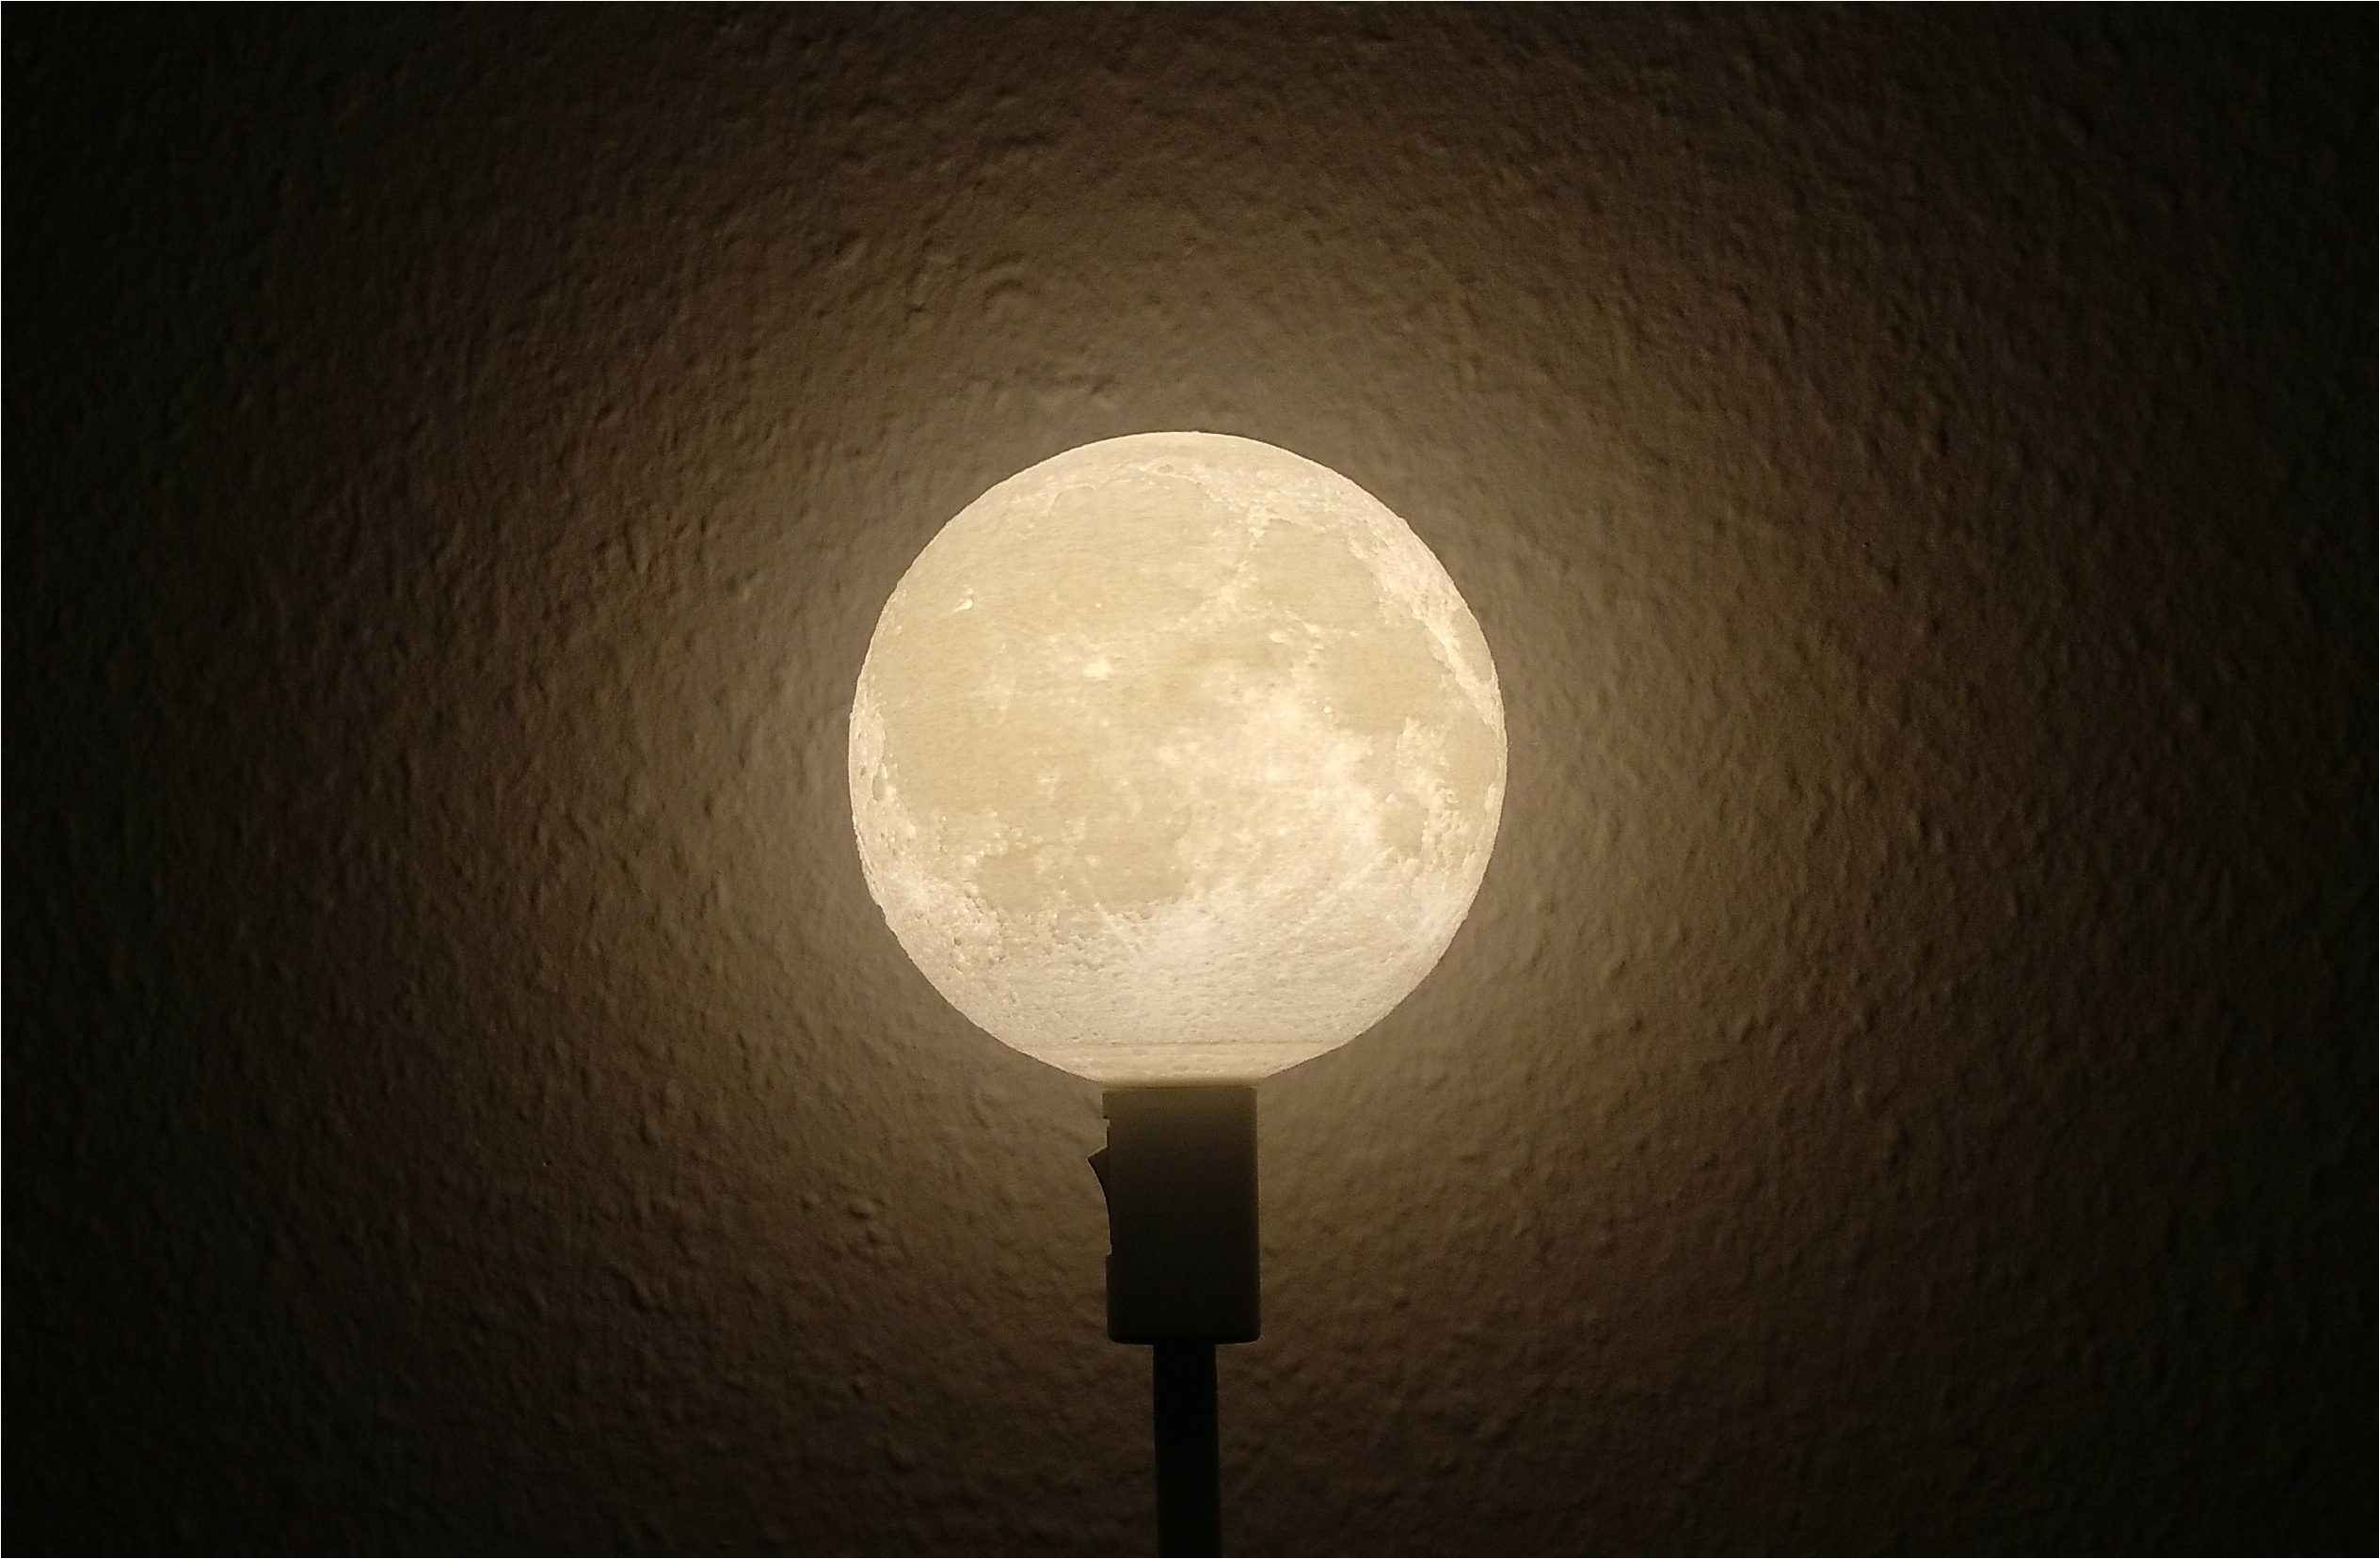 glowing moon ikea lamp stand by blkhawk nov 5 2017 view original